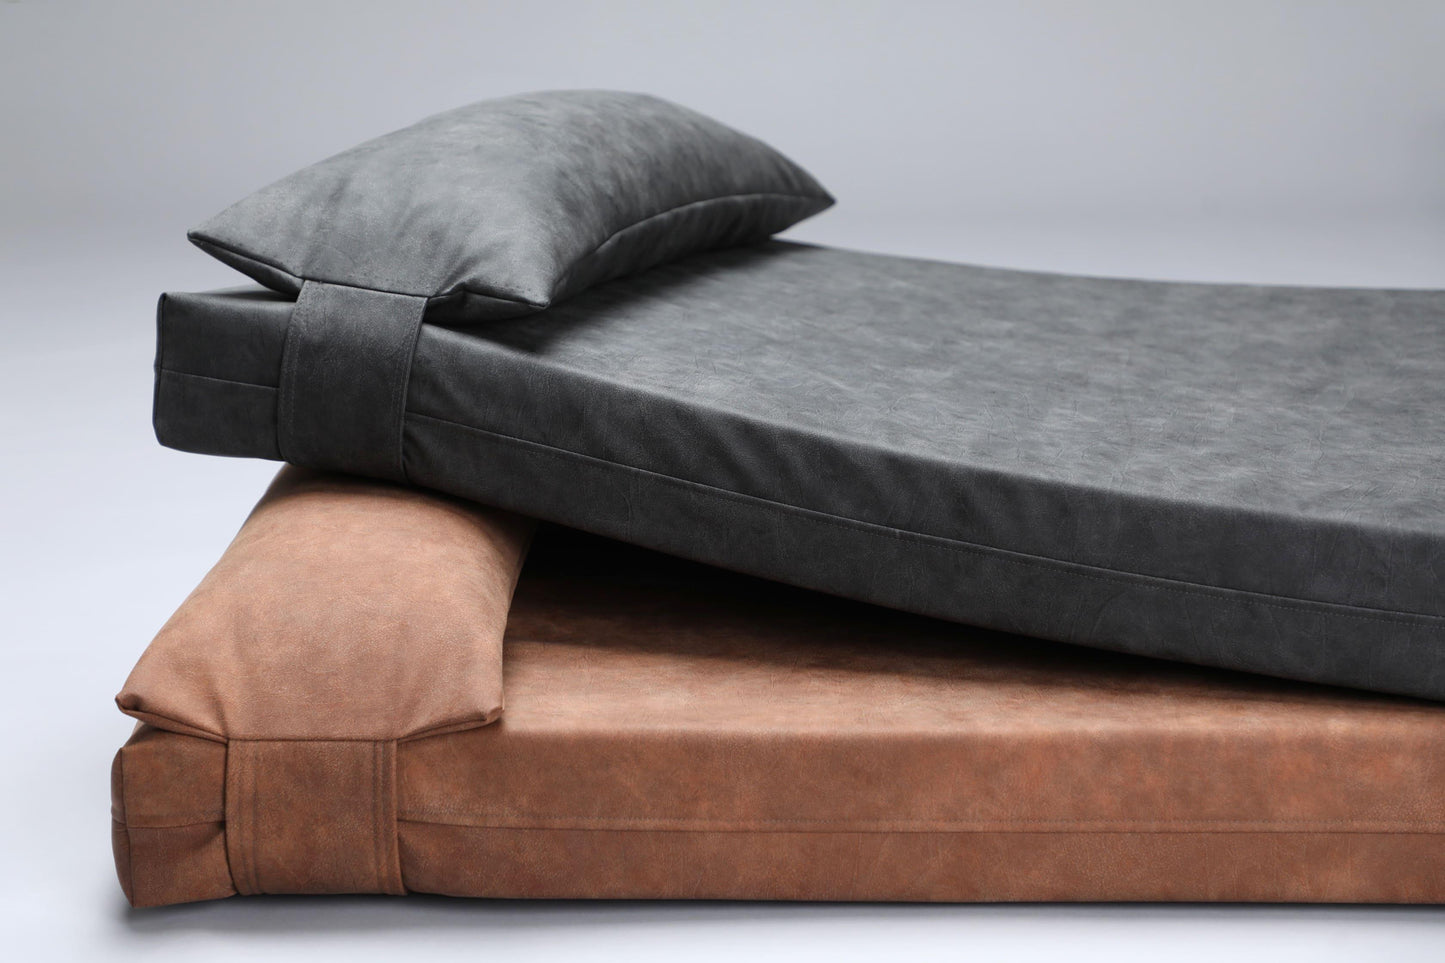 2-sided leather dog bed. IRON GREY - European handmade dog accessories by My Wild Other